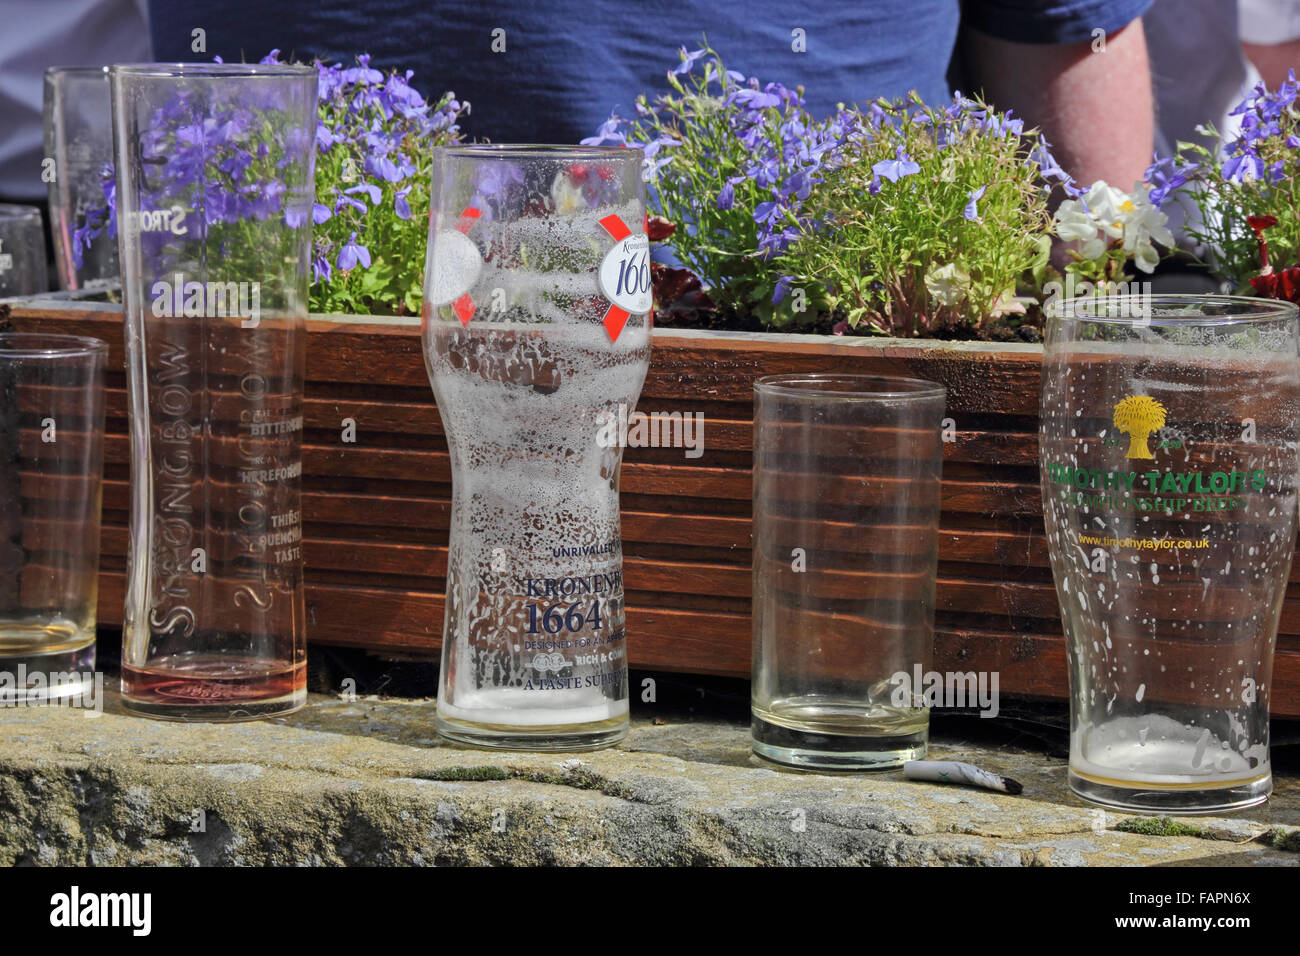 https://c8.alamy.com/comp/FAPN6X/empty-pint-beer-glasses-on-top-of-wall-outside-public-house-FAPN6X.jpg